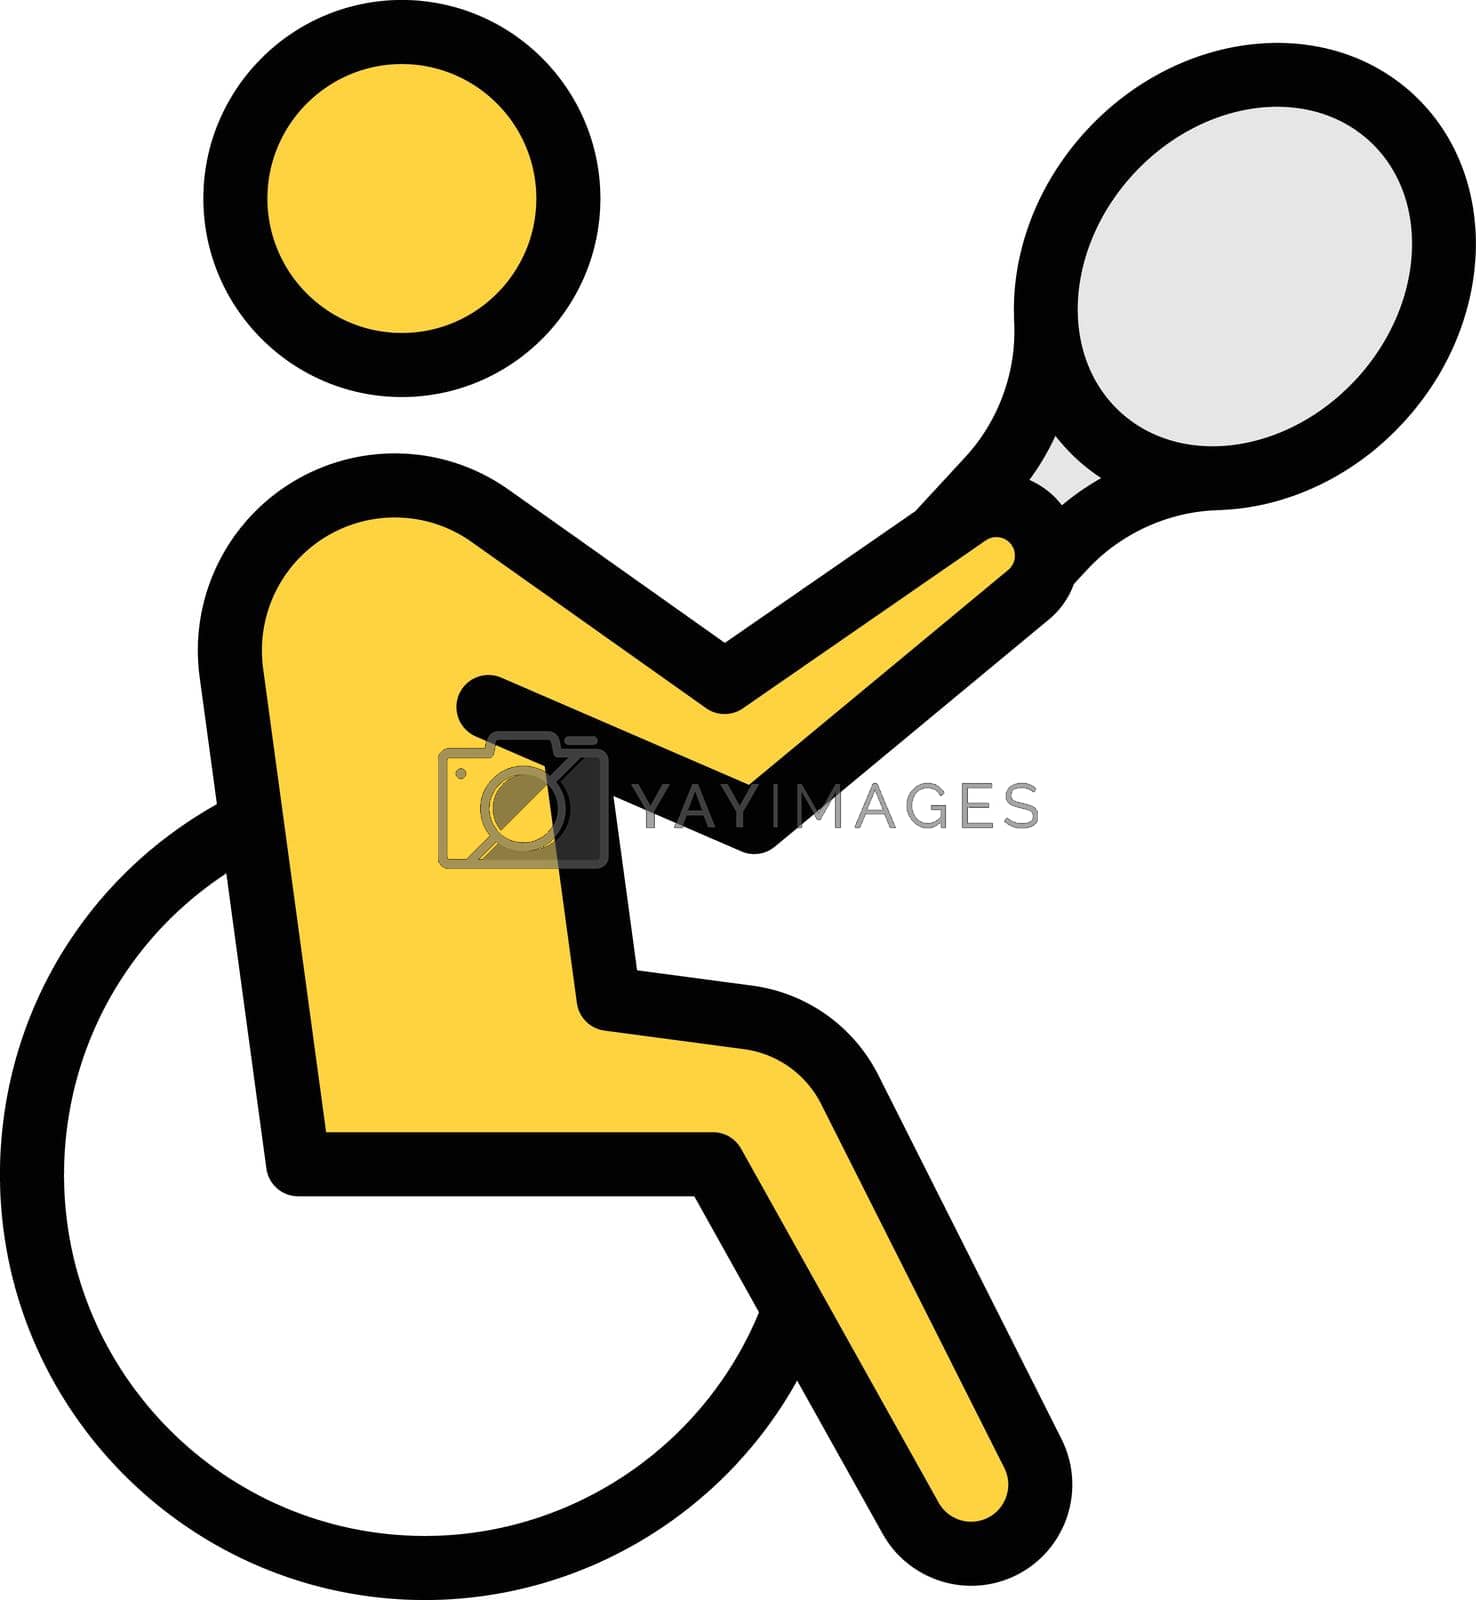 Royalty free image of handicap by FlaticonsDesign